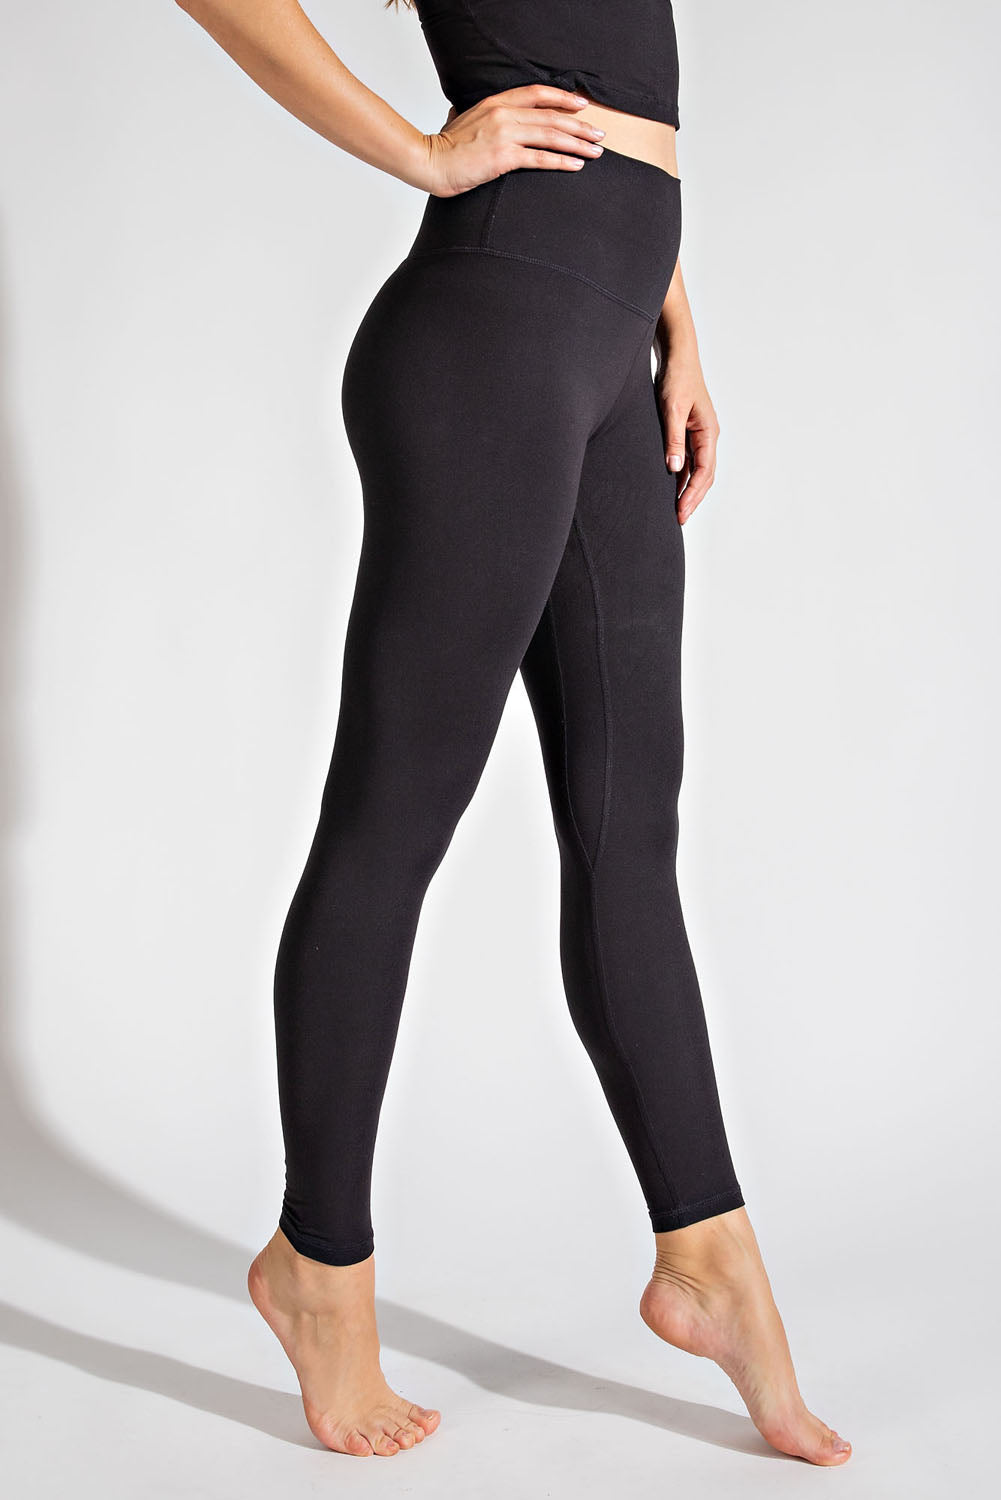 Rae Mode Butter Soft Full Length Leggings and Matching Top